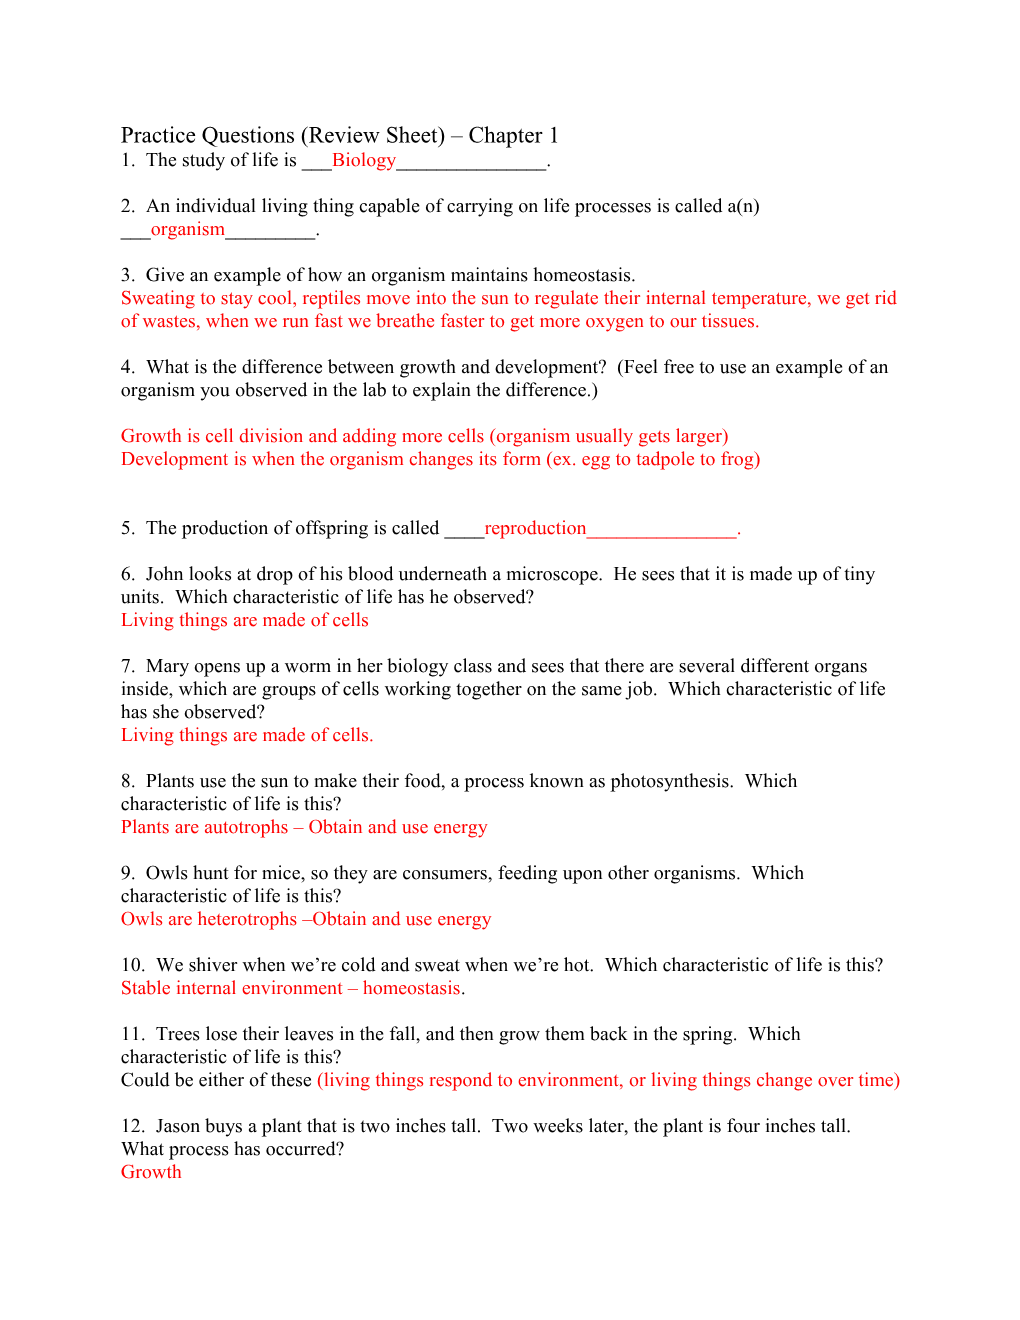 Practice Questions (Review Sheet) Chapter 1